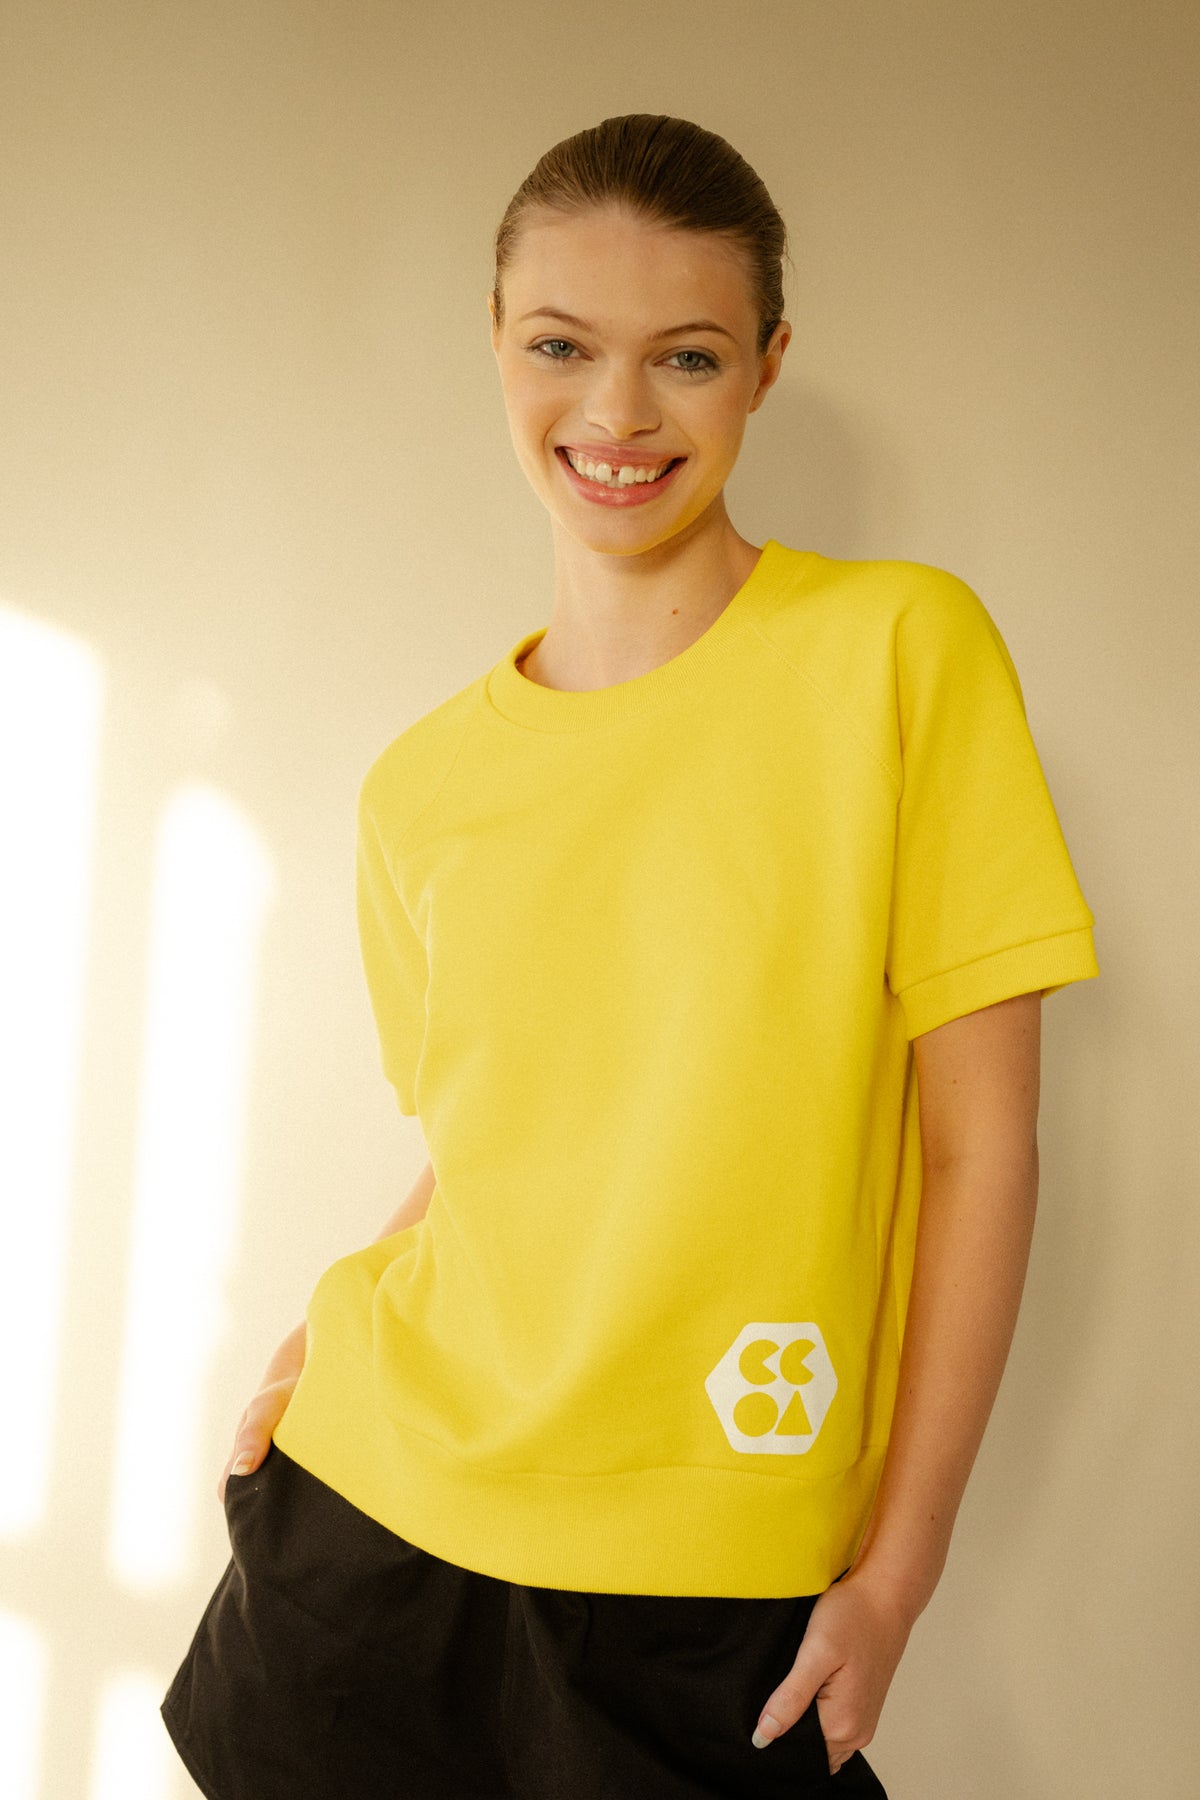 
            Smiley, white female wearing short sleeve raglan training top in Canary Yellow with white CCOA Logo.